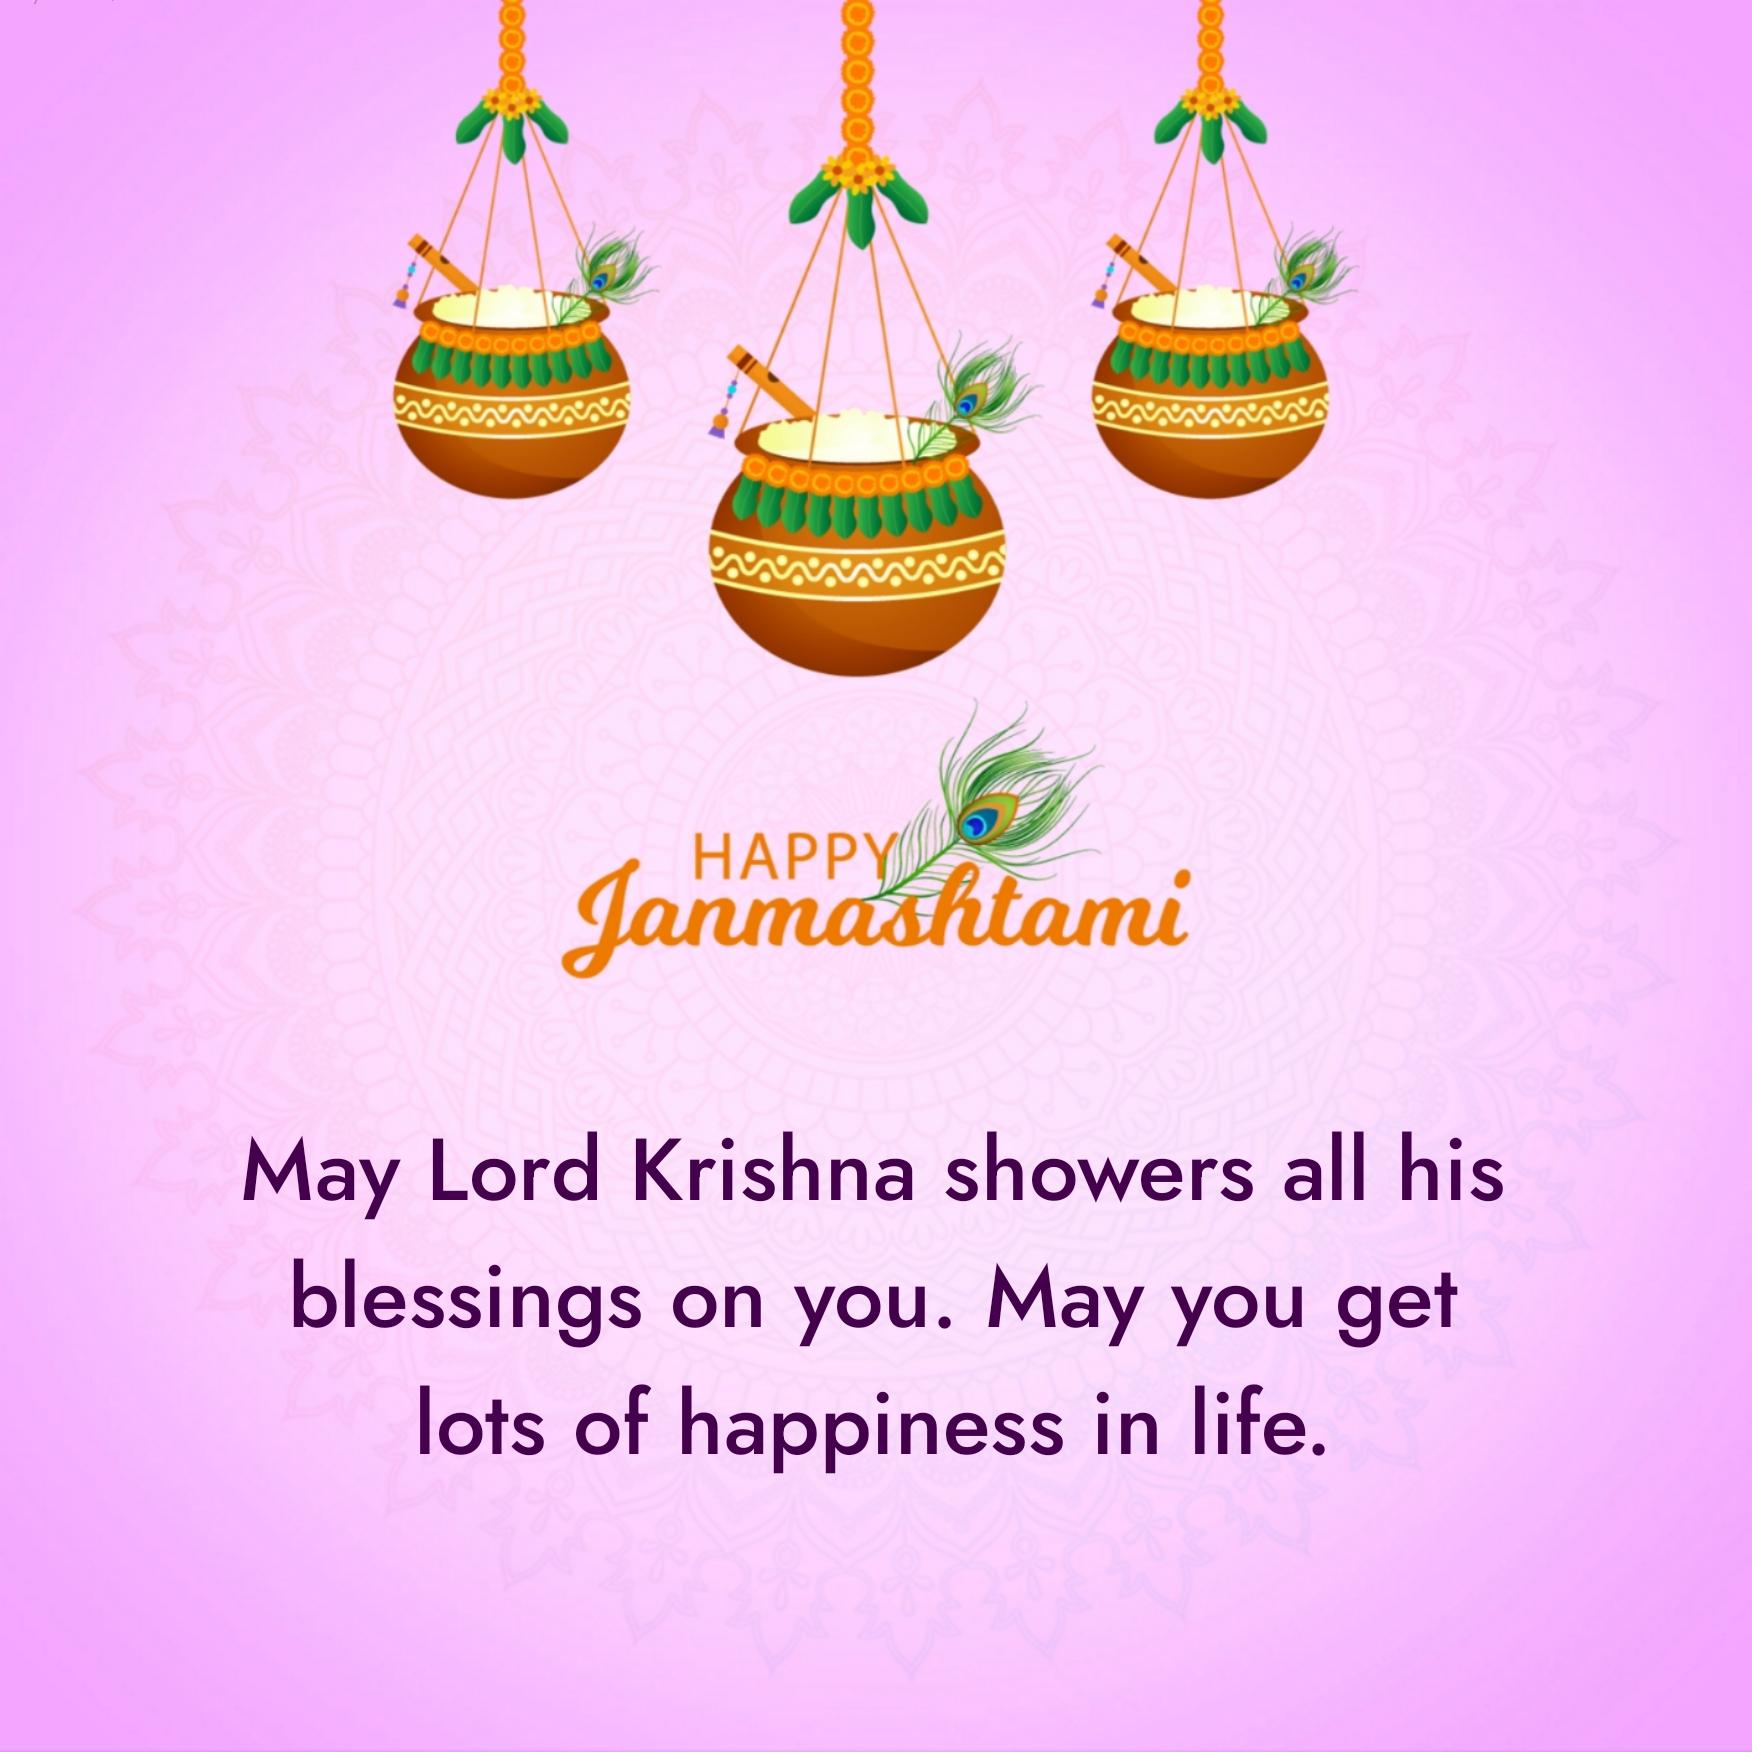 May Lord Krishna showers all his blessings on you